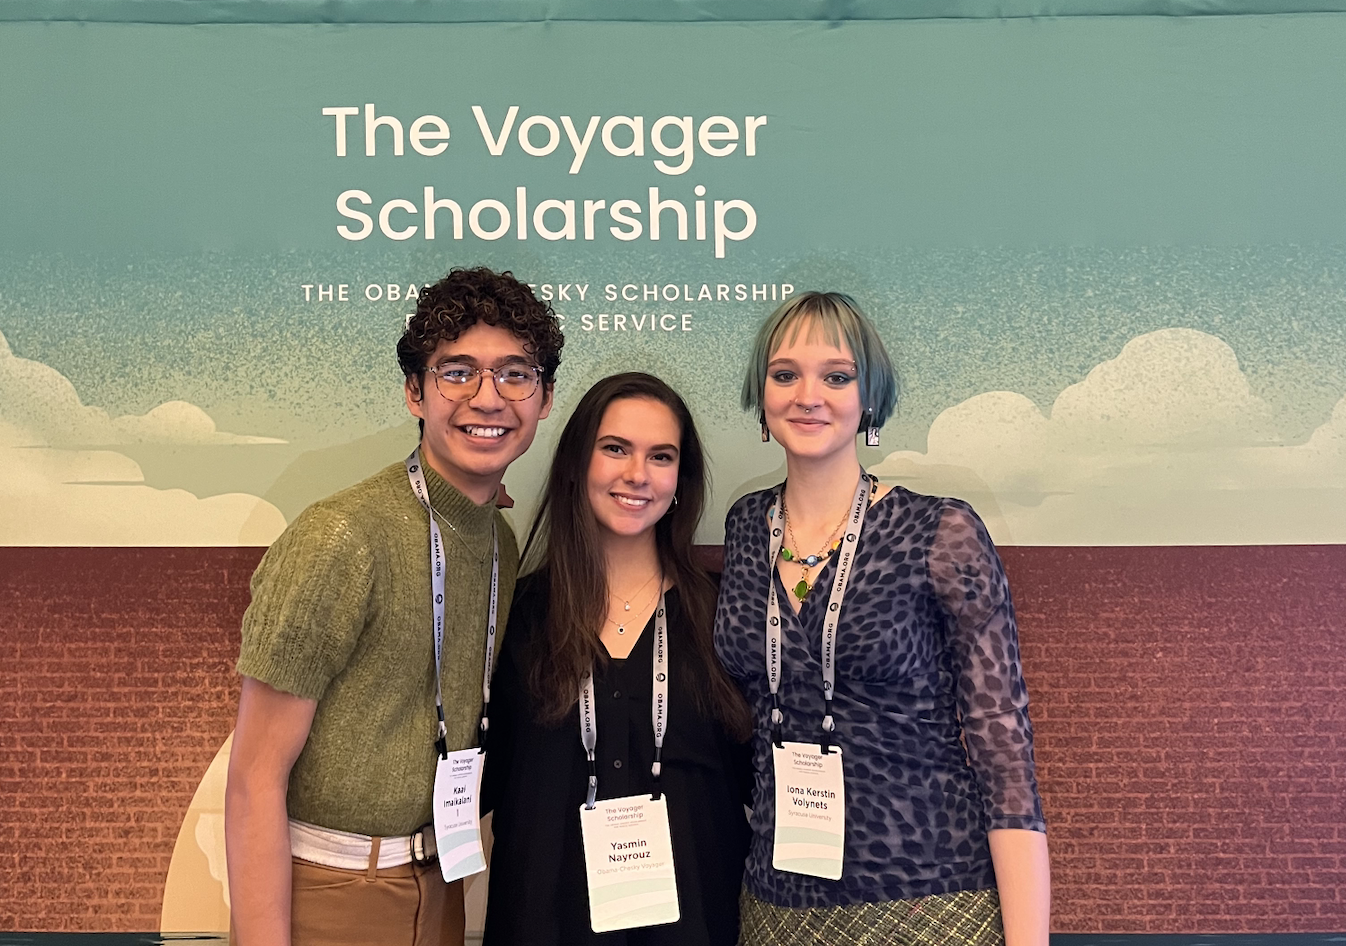 3 people stand and smile together under the voyager scholarship sign